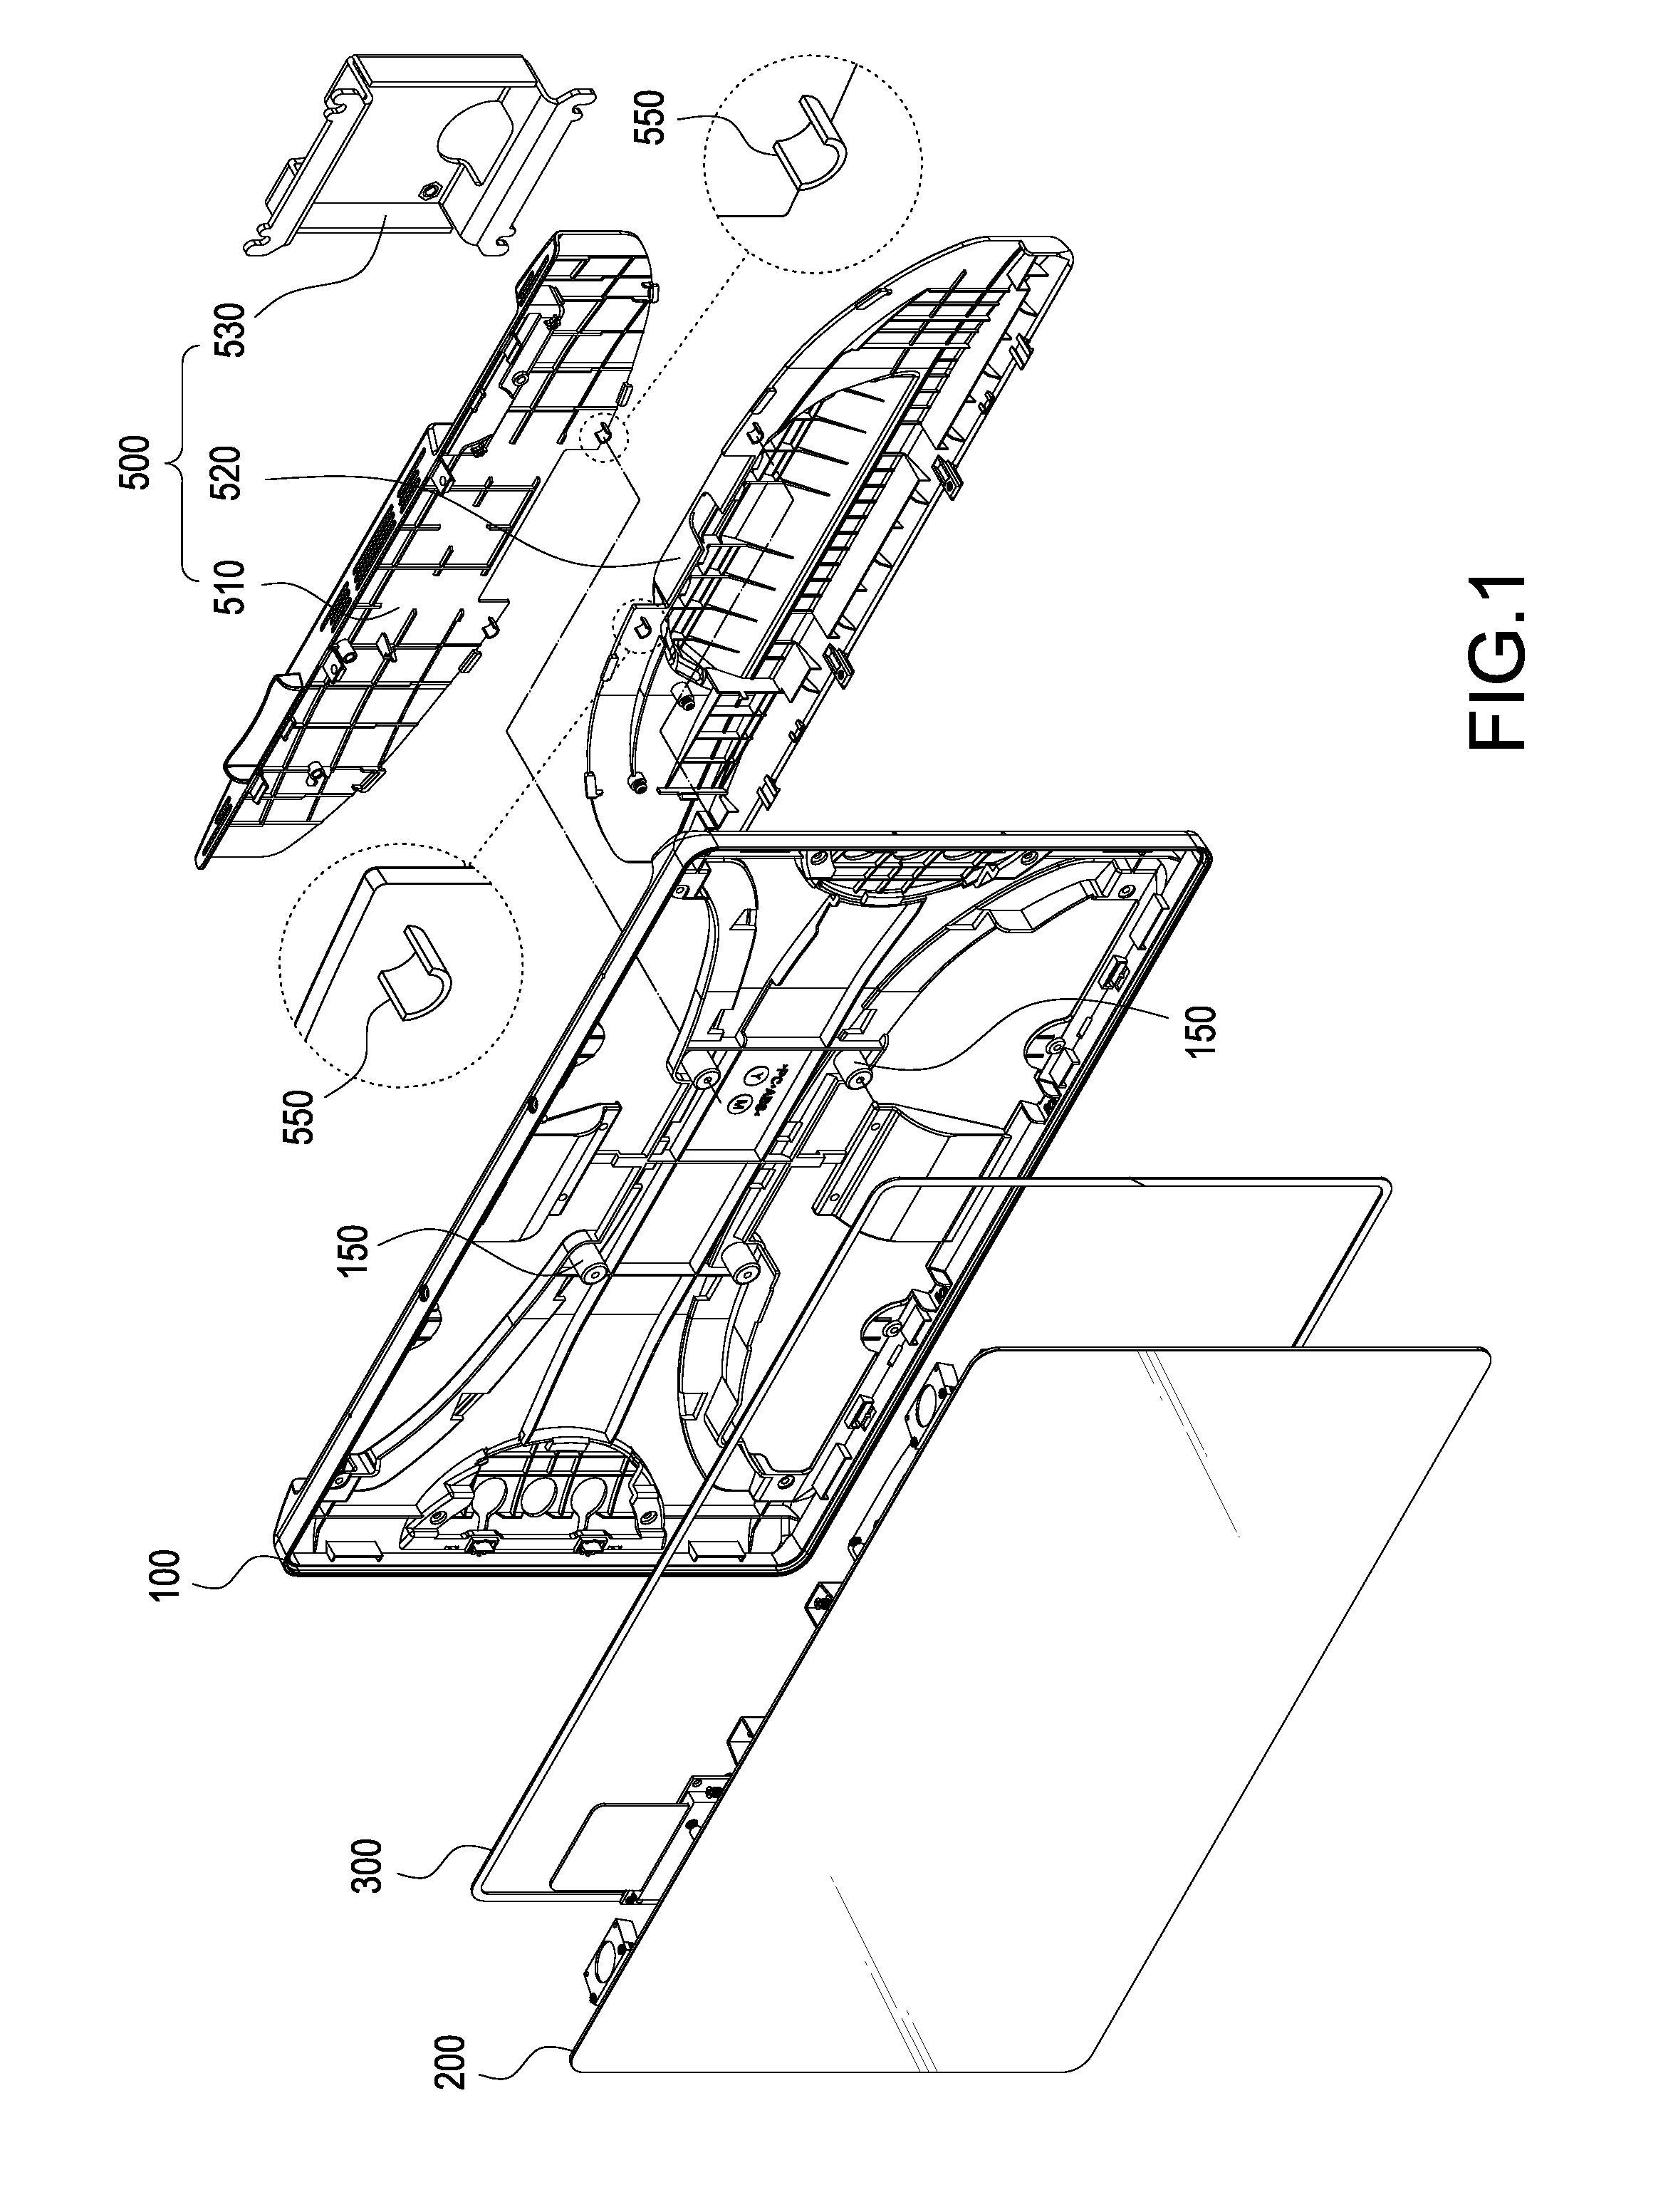 Waterproof structure for use in display device